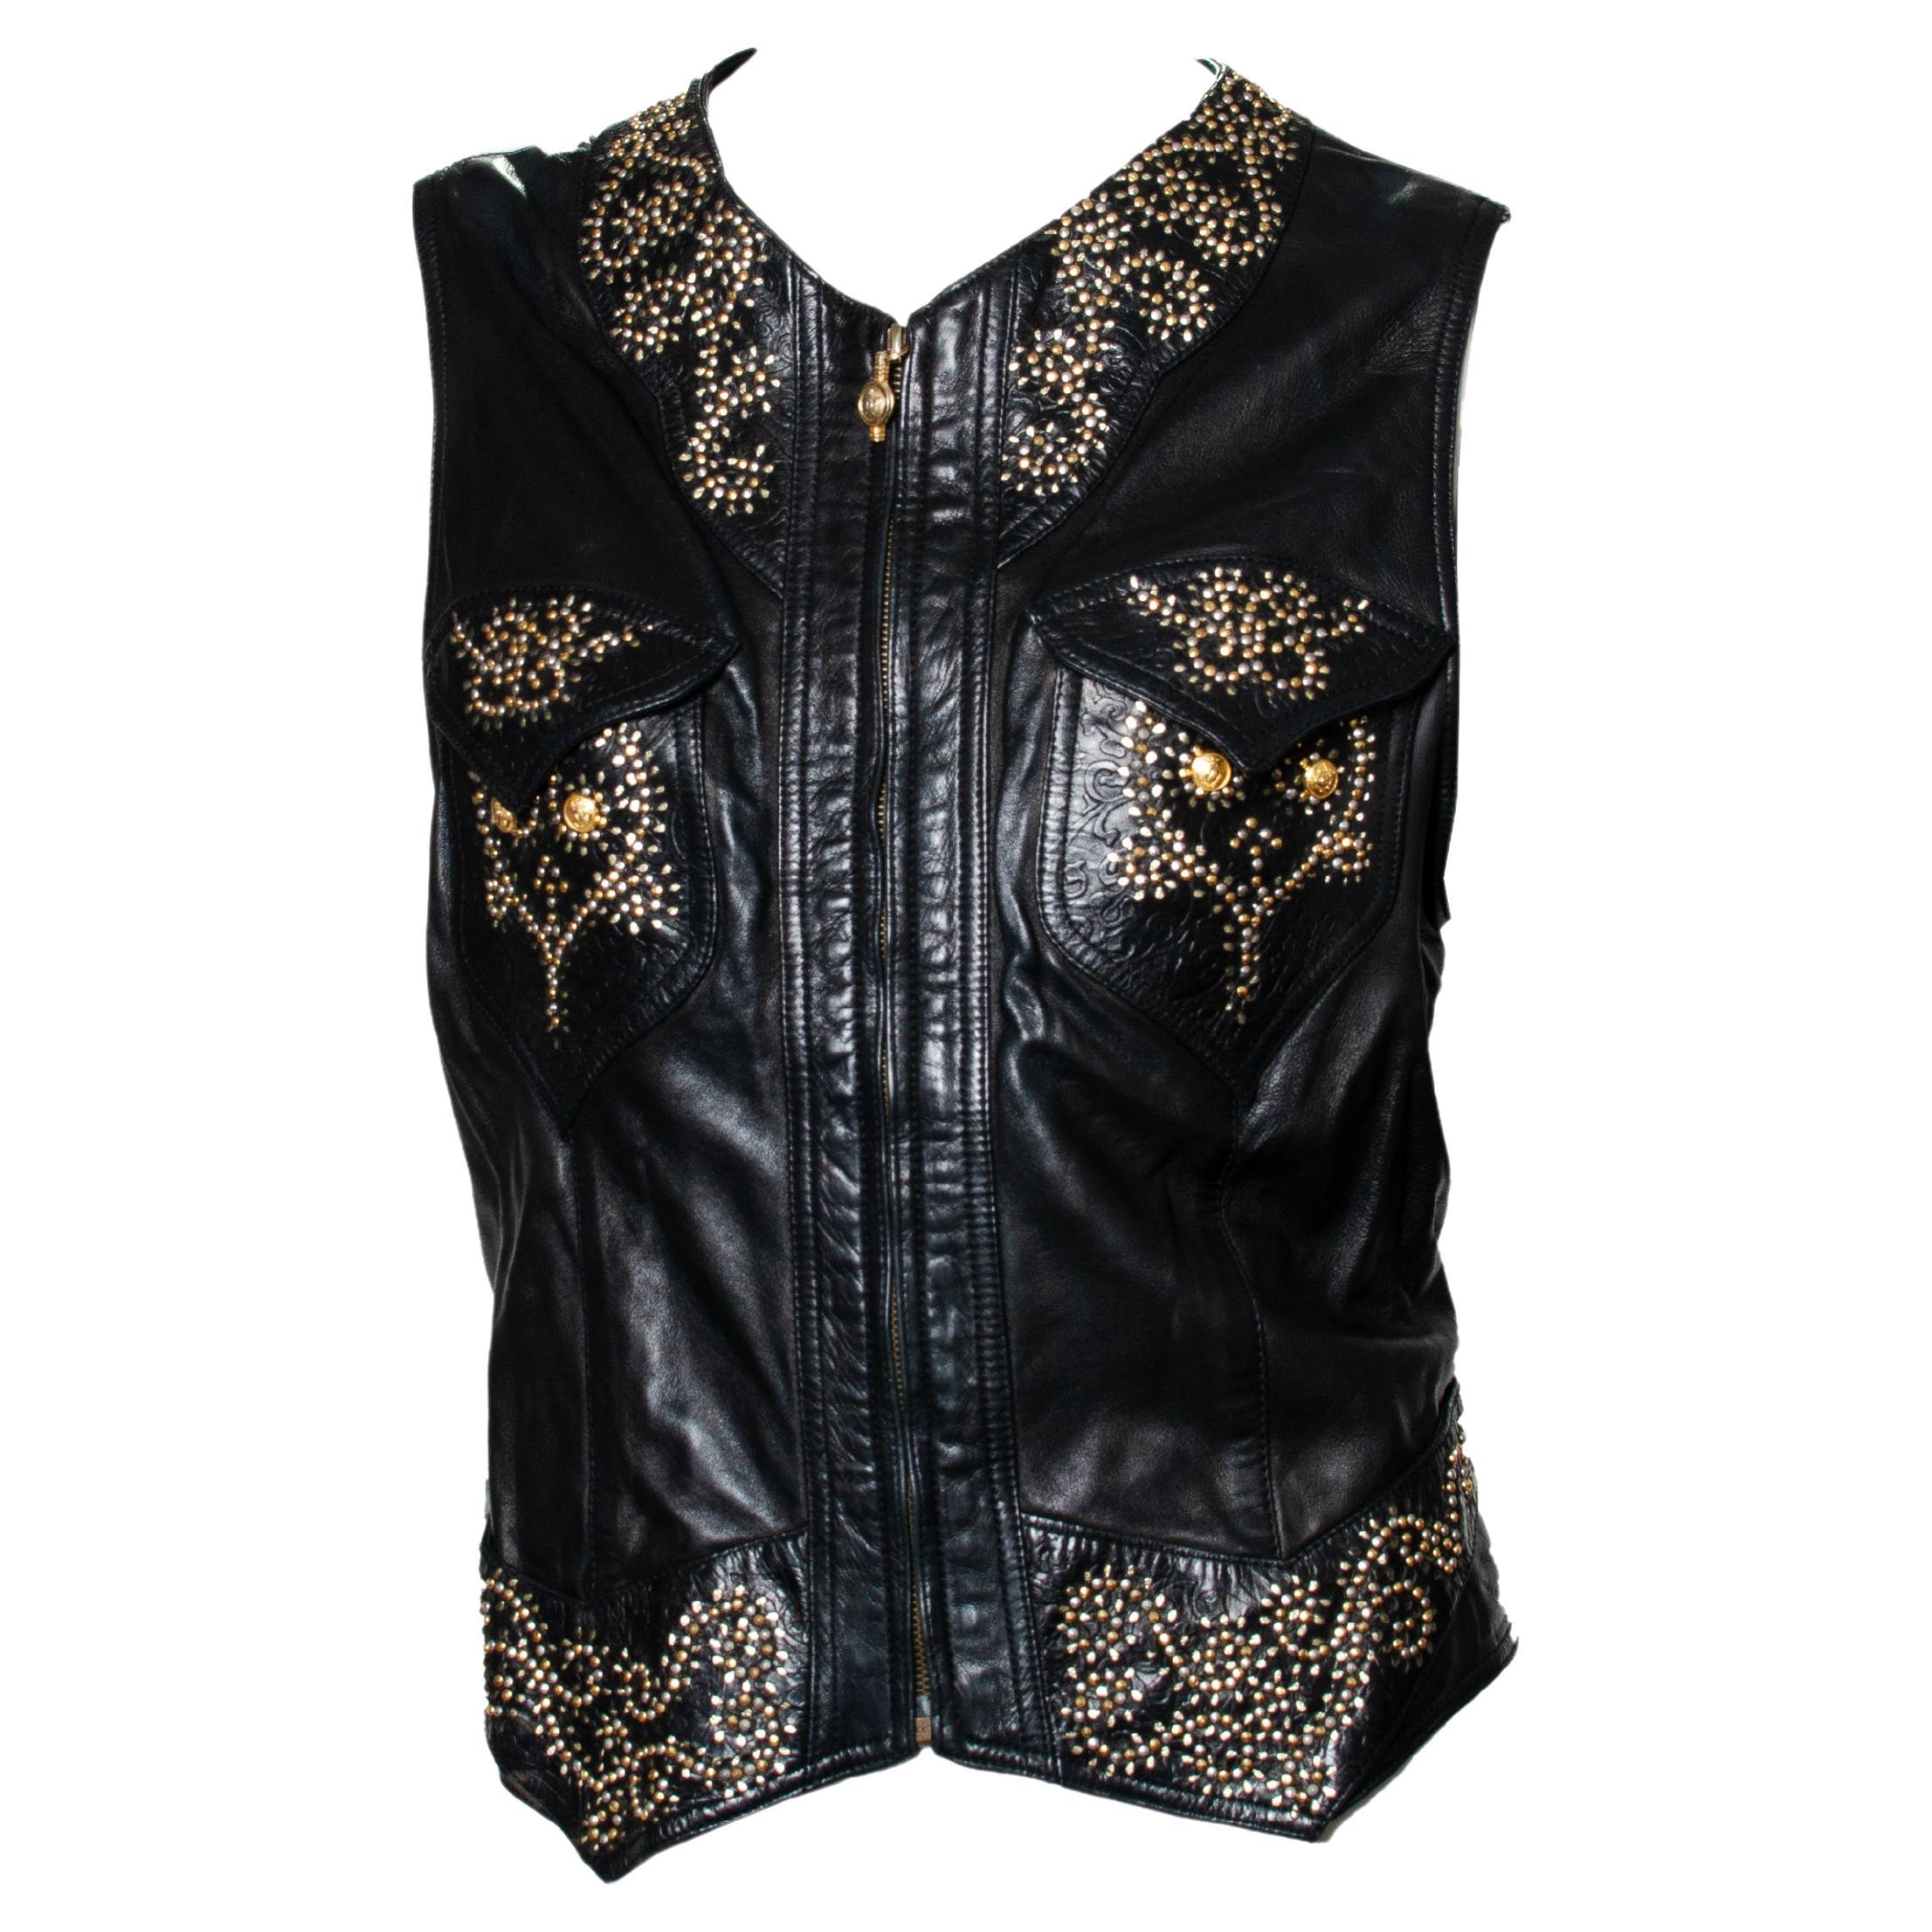 F/W 1992 Gianni Versace 'Miss S&M' Studded Leather Vest Medusa Accents For Sale